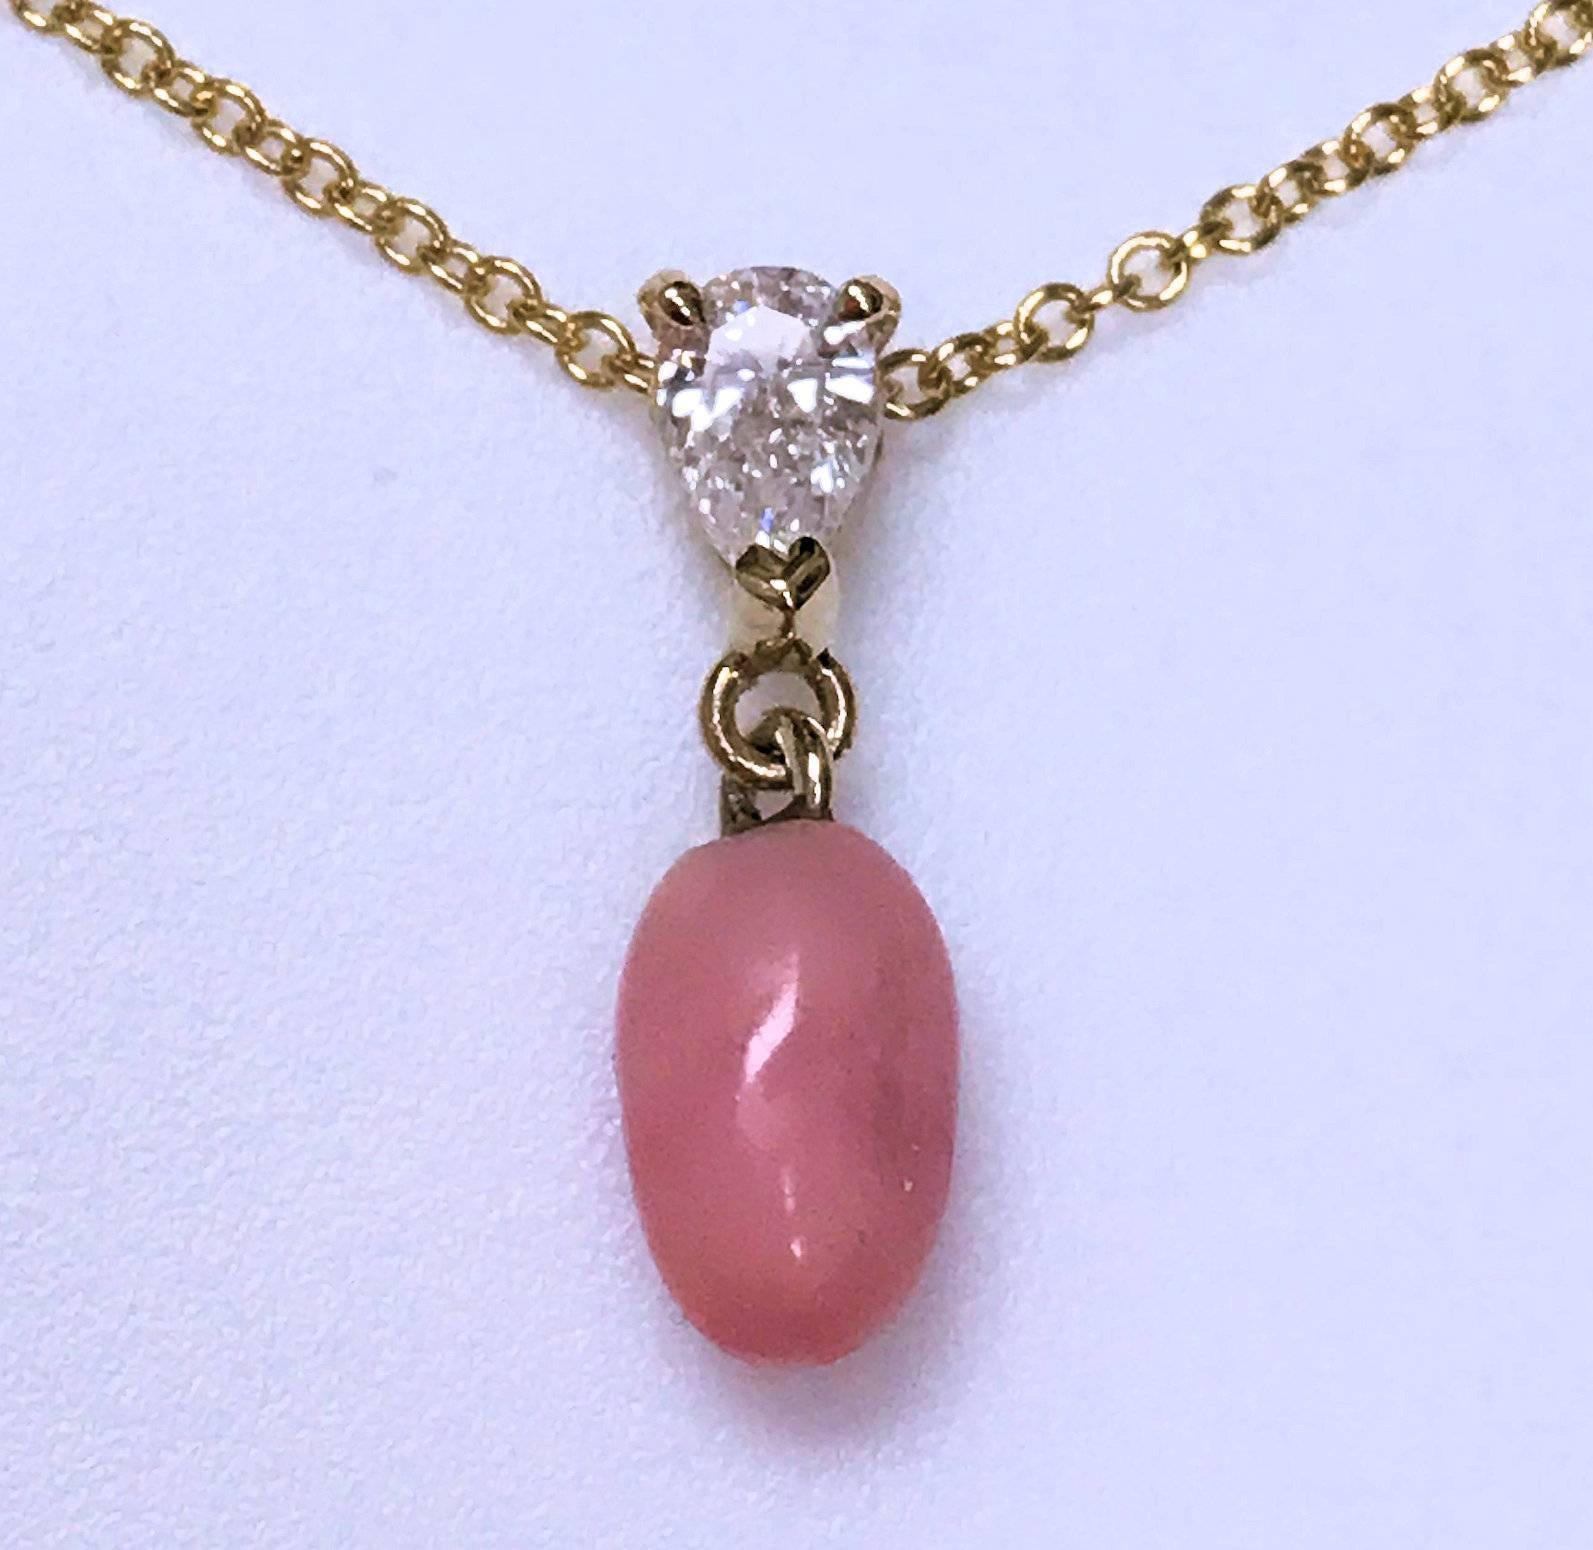 Natural light pink conch pearl with the all-important visible flame.  Nice oval shape. It measure 6.9 mm long and 4 mm. wide. This pendant is set with a pear shape diamond weighing 0.14 carat of grade SI-1, H. 14 karat yellow gold setting and chain.